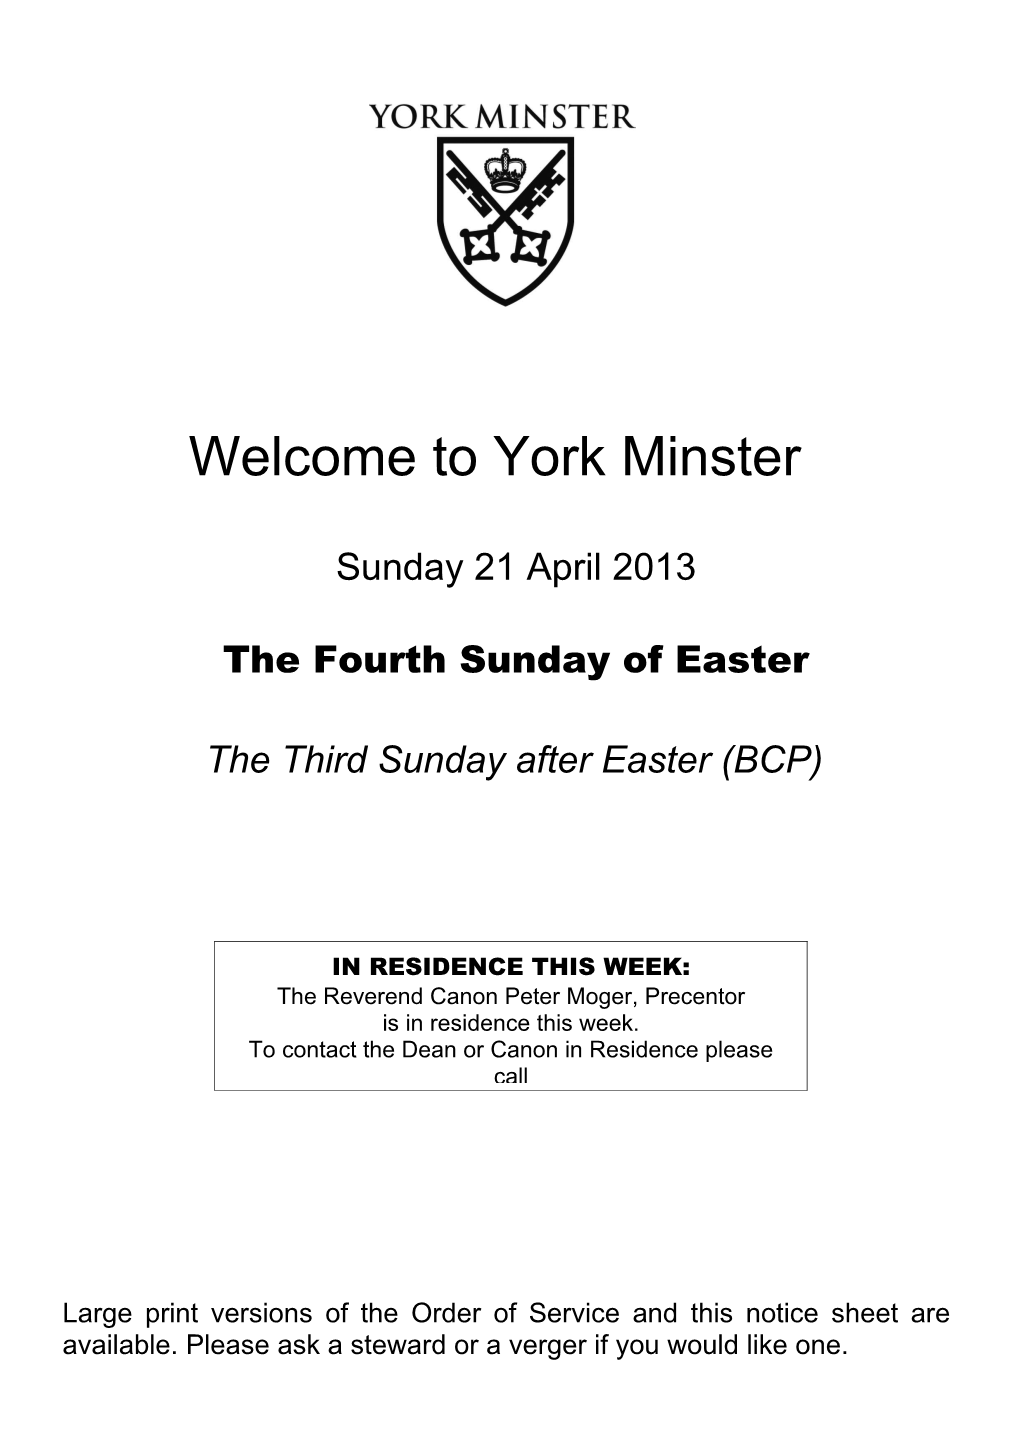 The Fourth Sunday of Easter